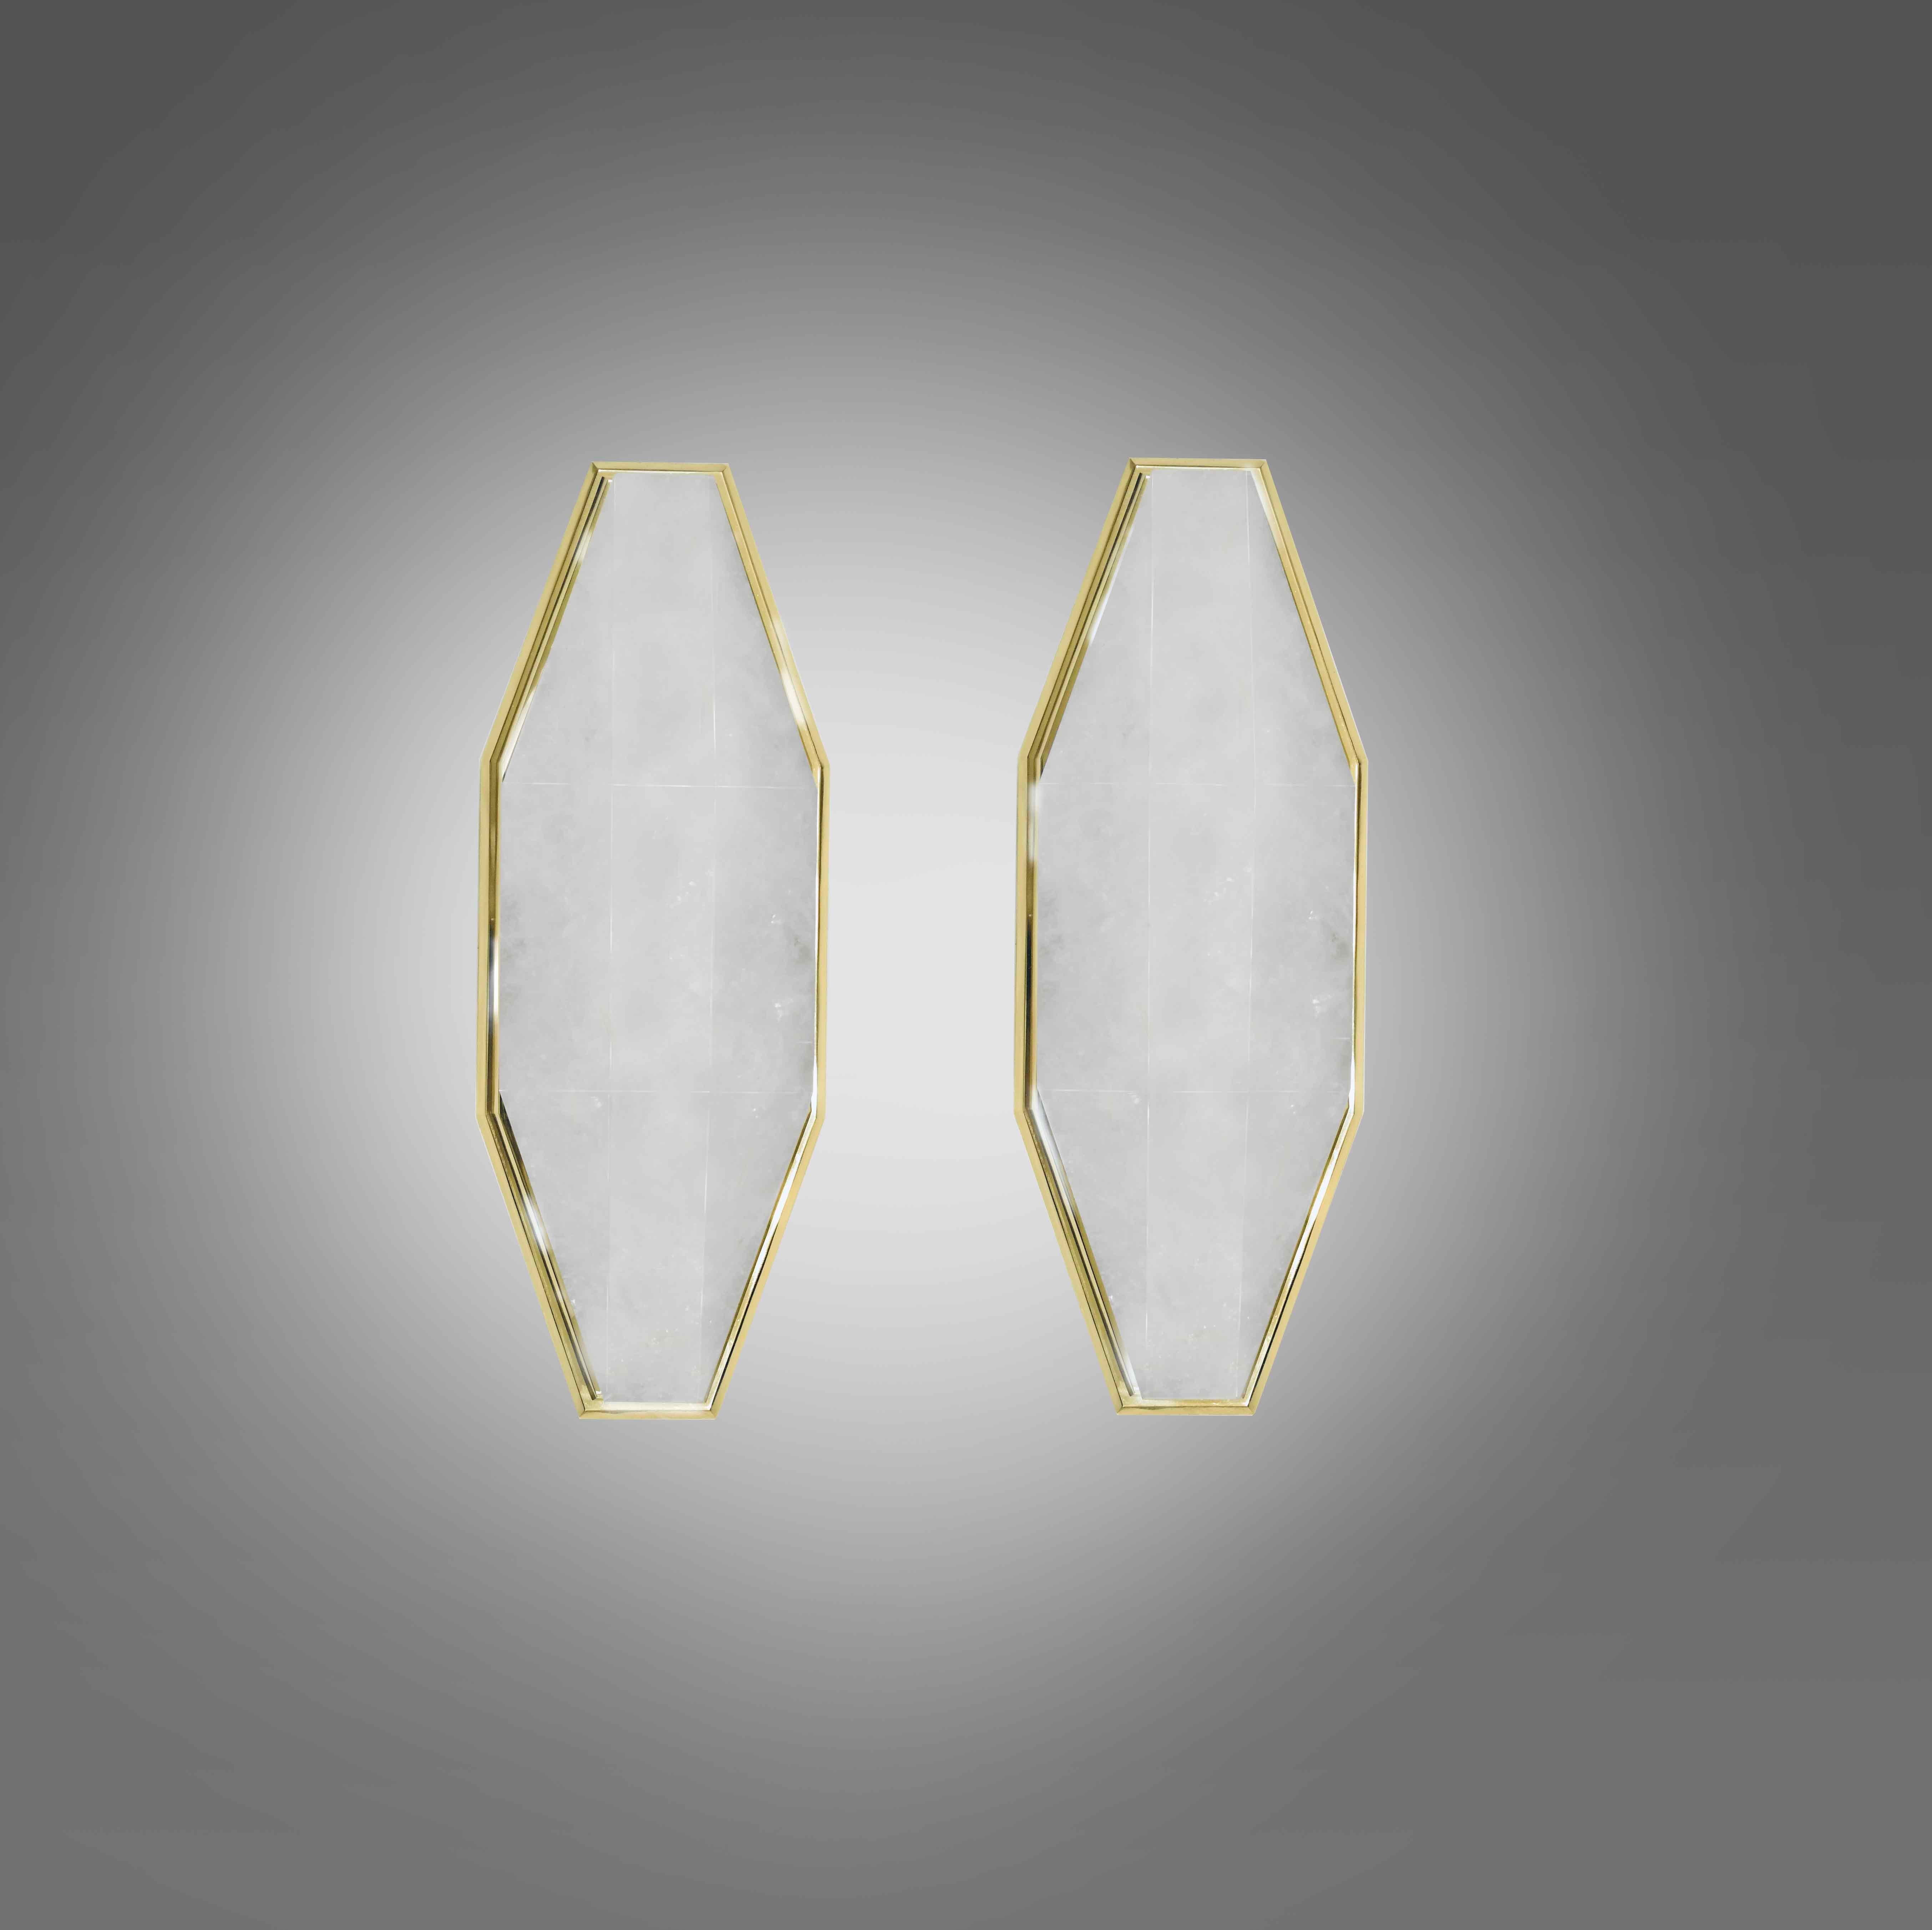 Pair of fine carved diamond form rock crystal sconces with polished brass mounts. Created by Phoenix Gallery.
Each sconce installs 2 sockets. 60 watts max each socket, the total of 120 watts maximum.
Custom size upon request.

 